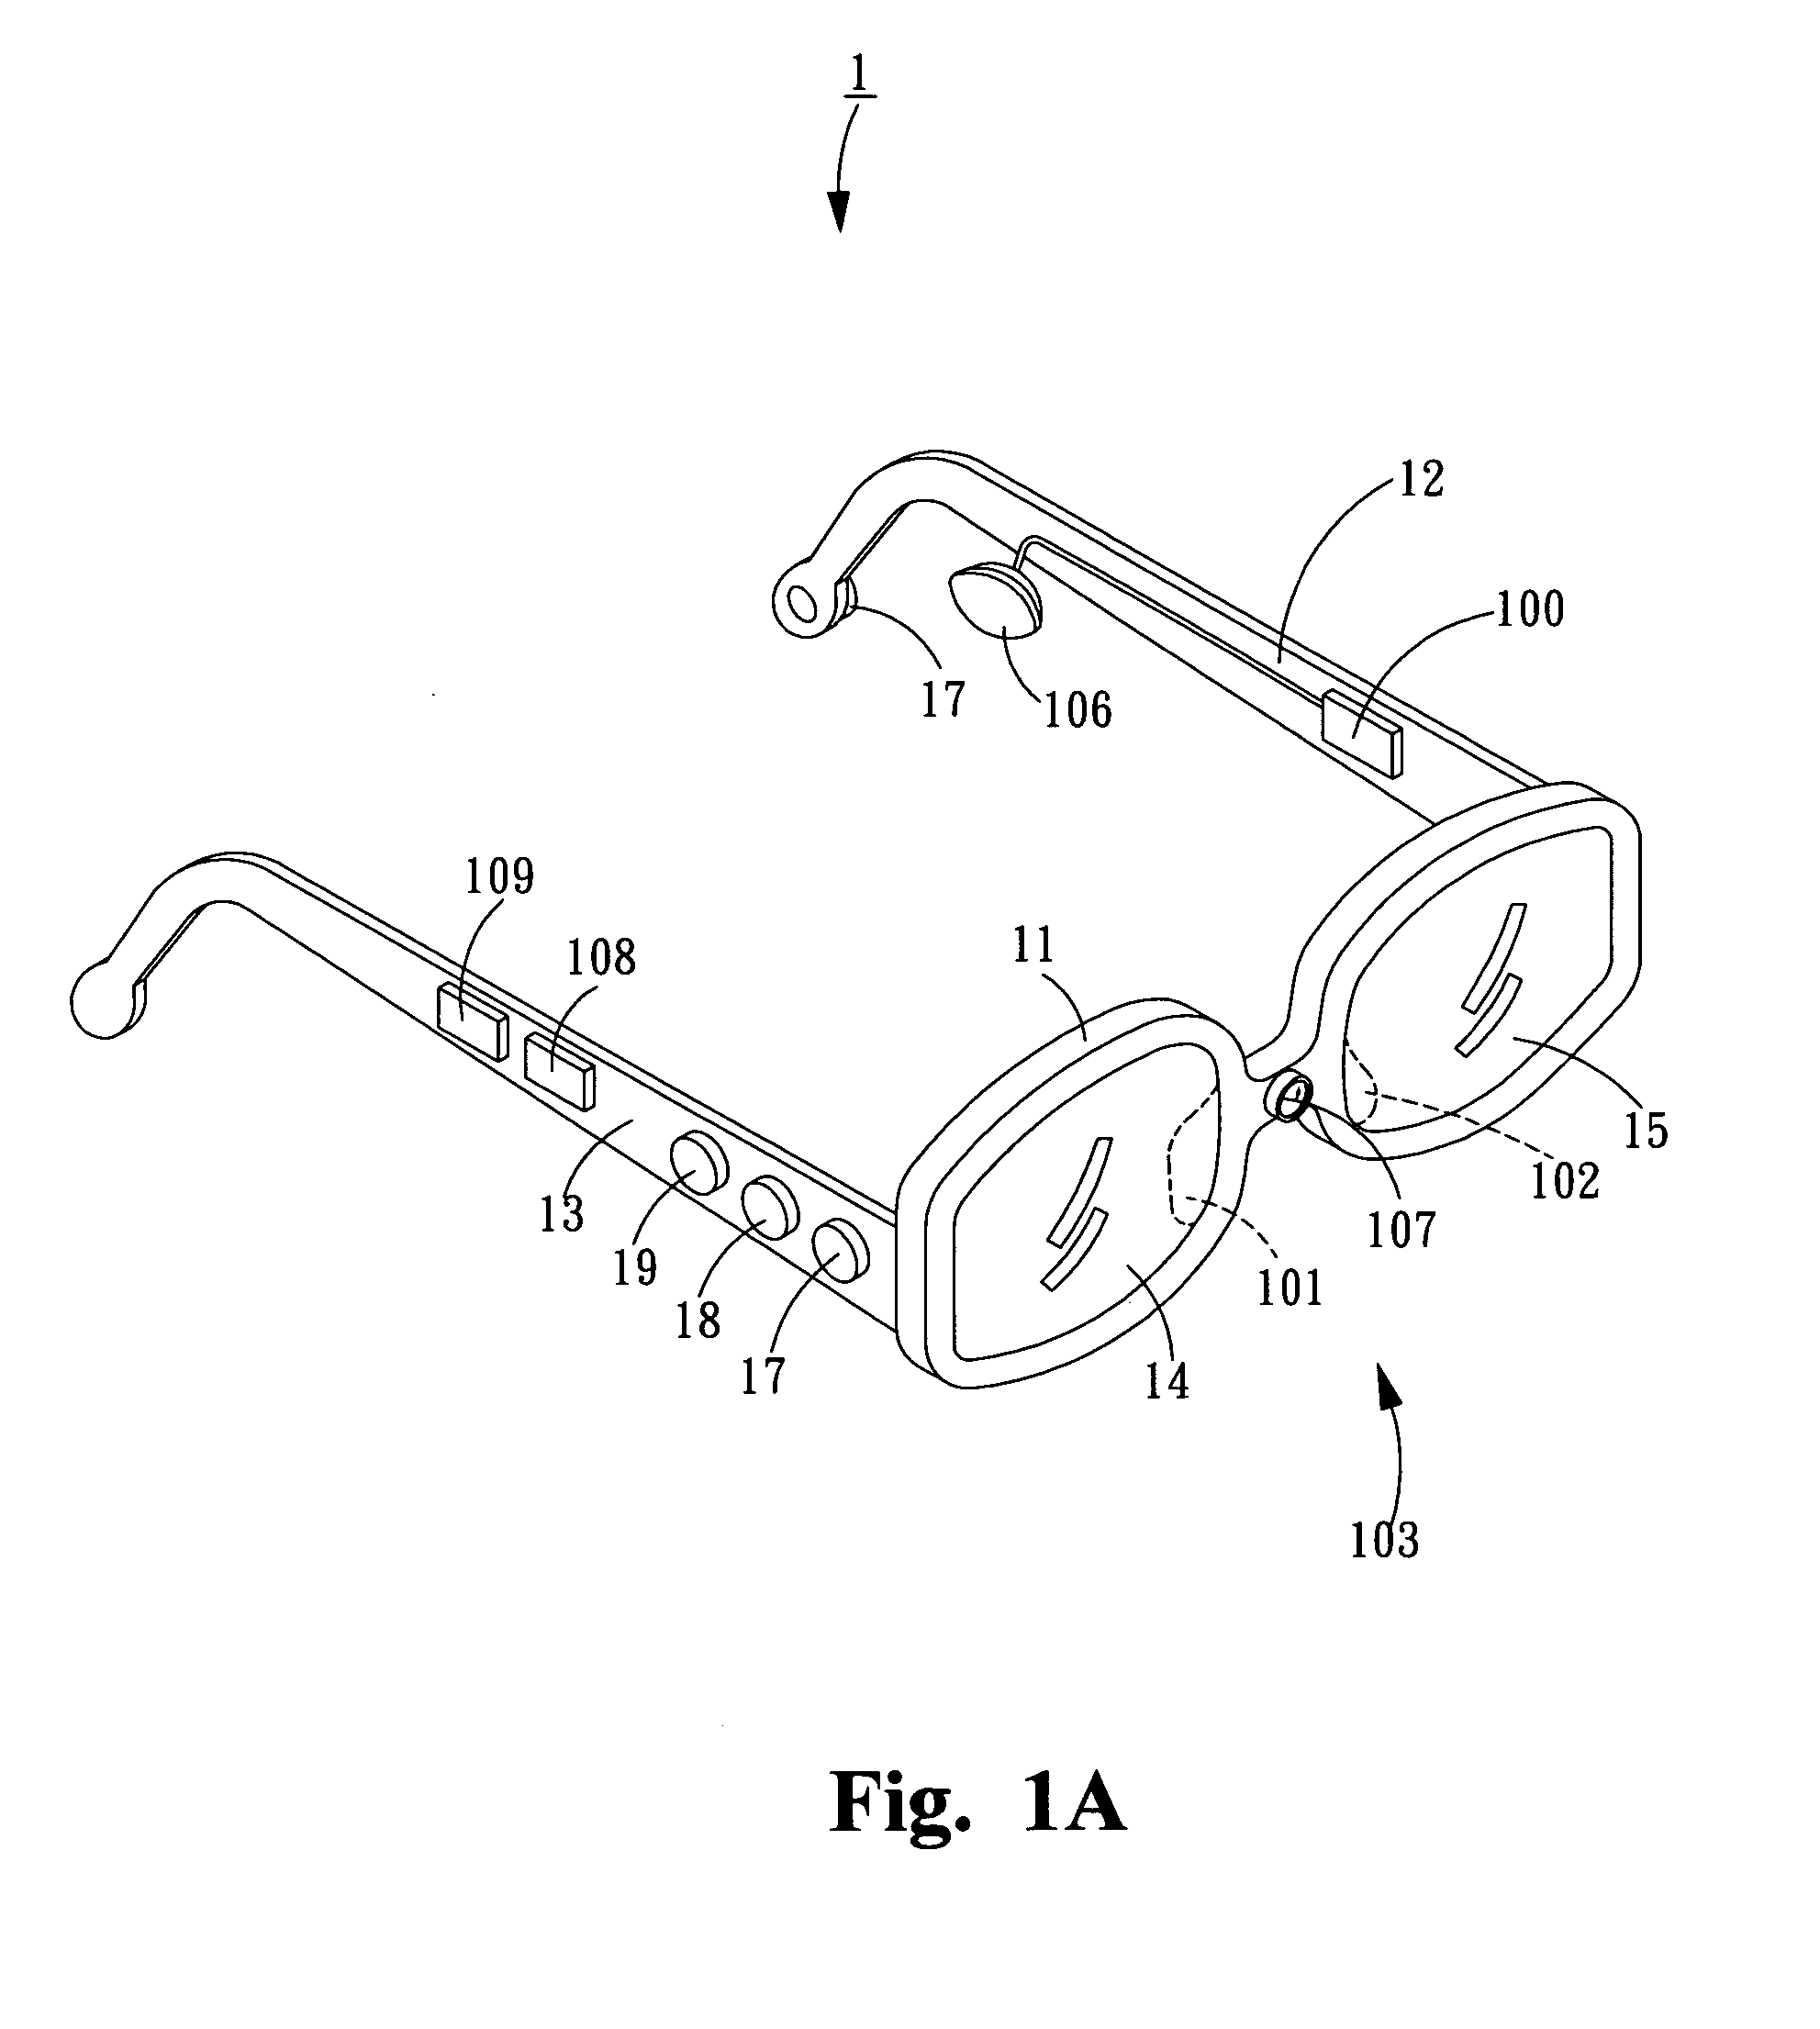 Focus adjustable head mounted display system for displaying digital contents and device for realizing the system